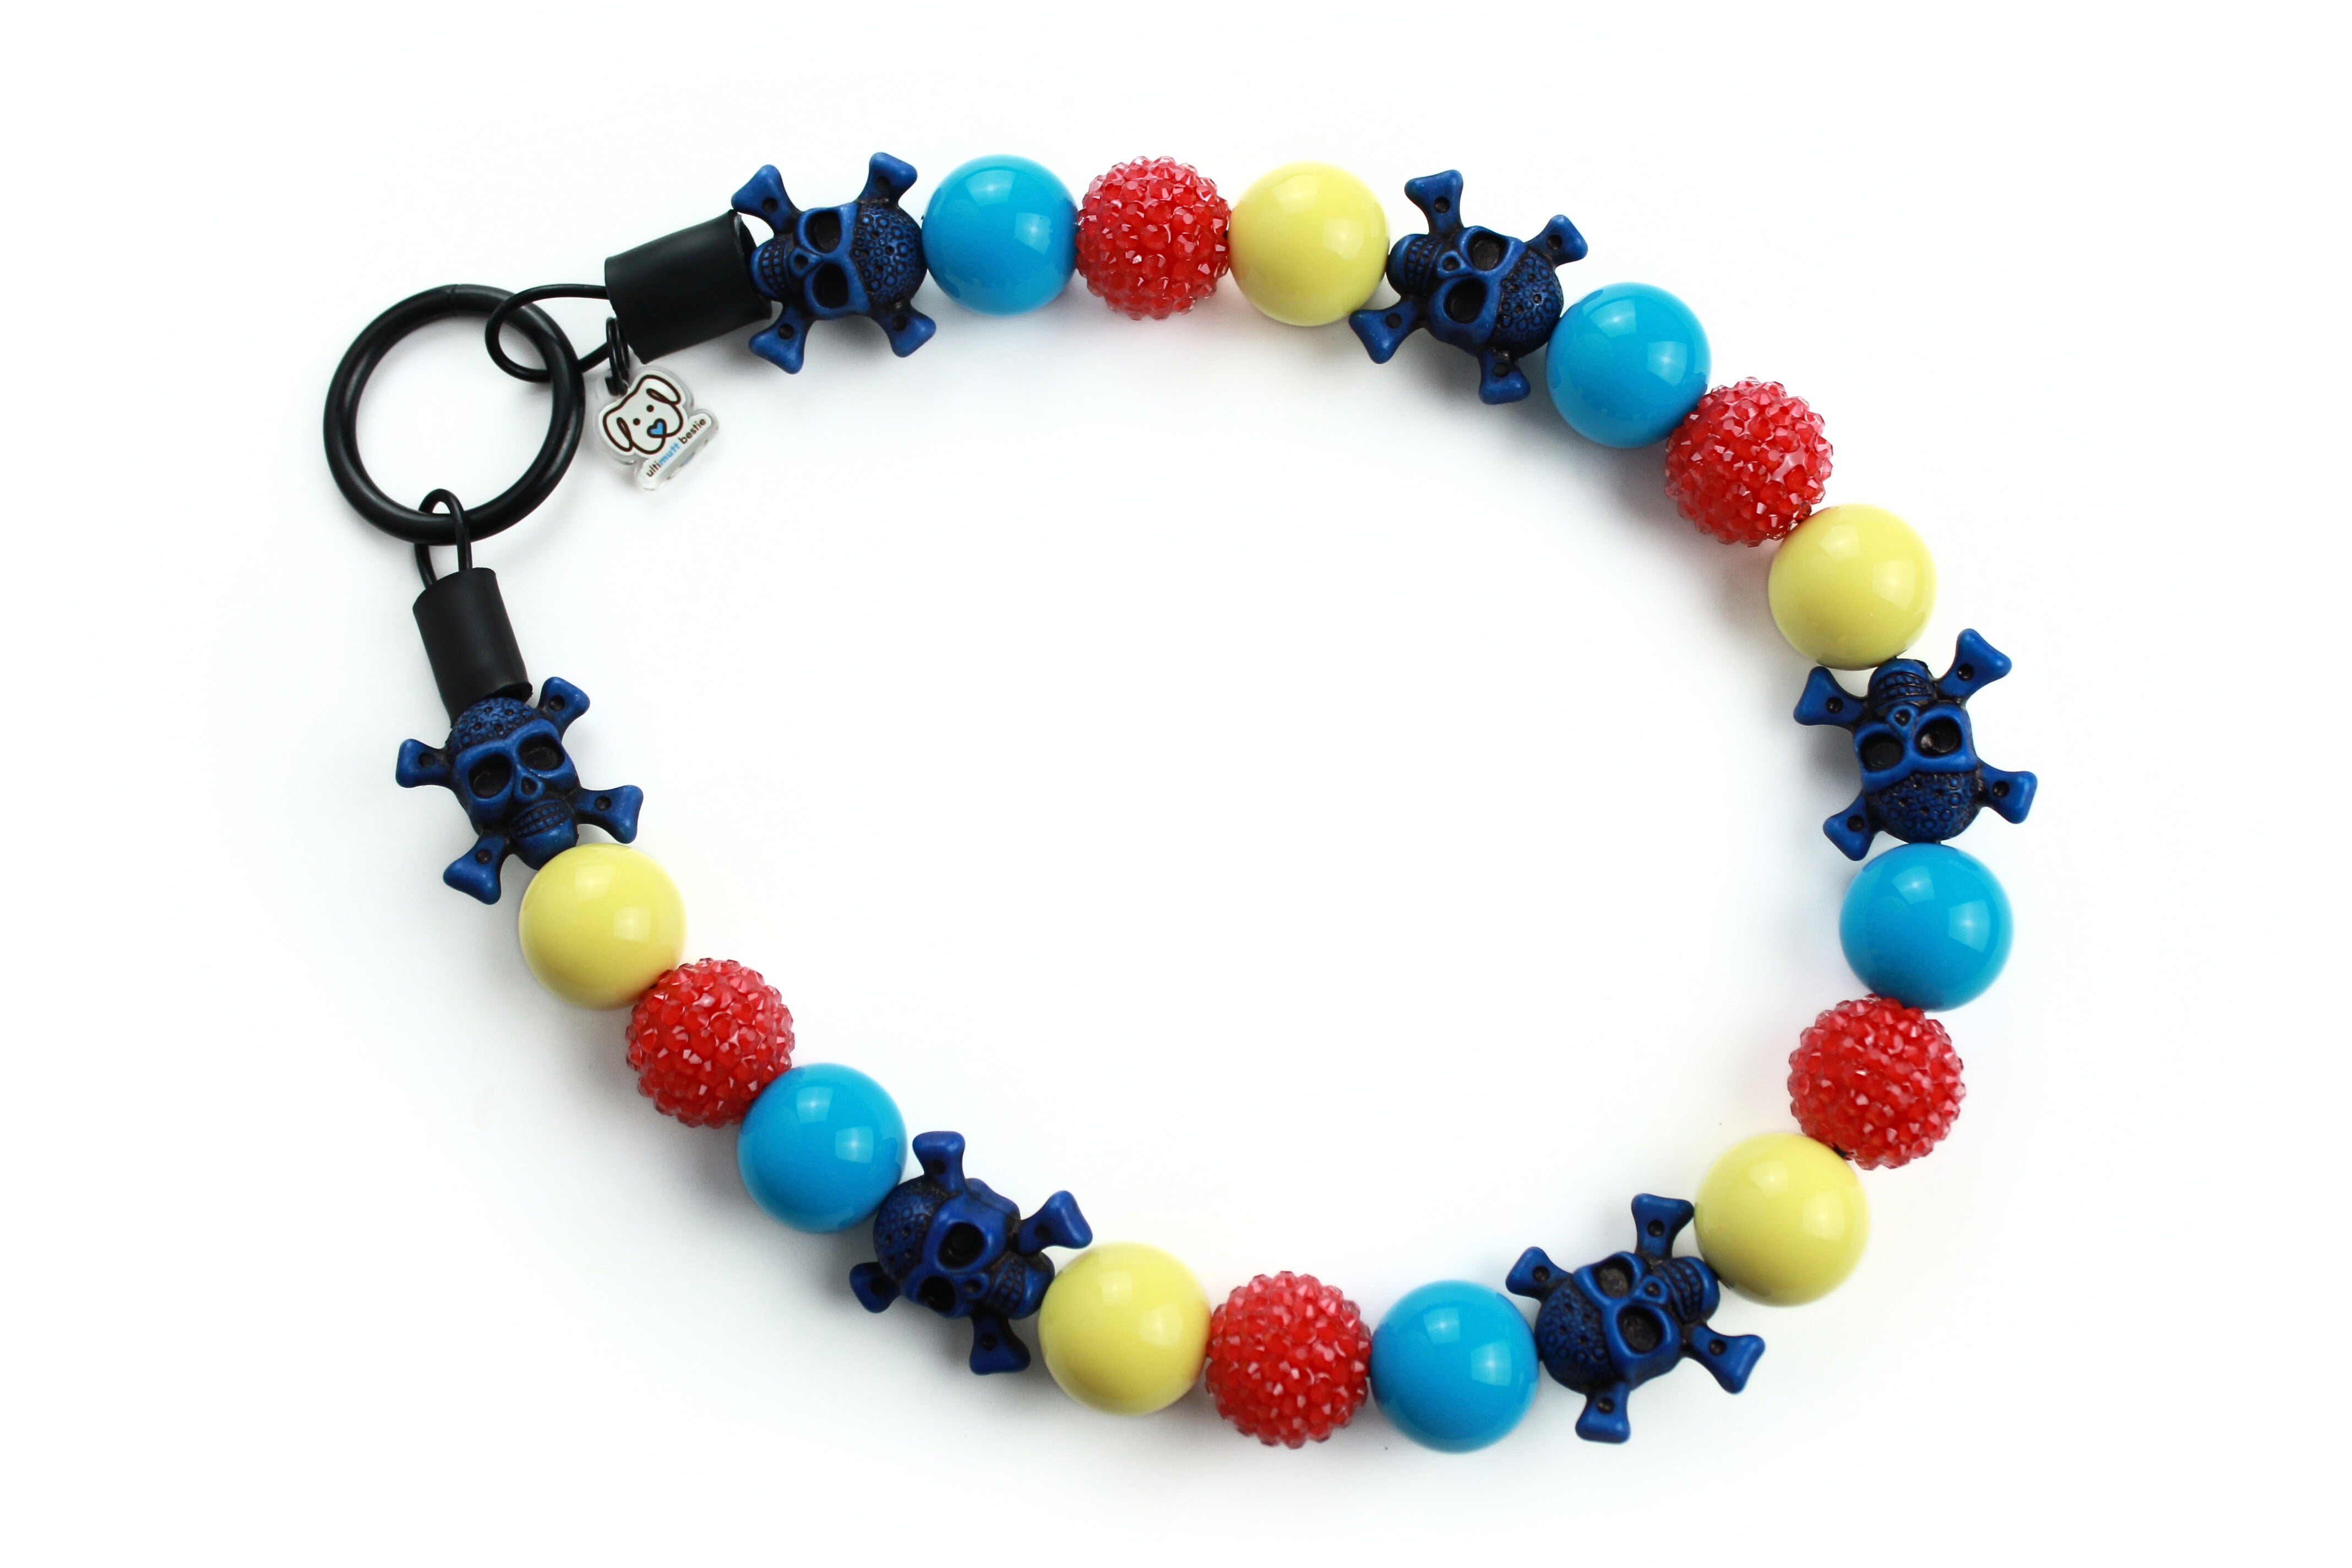 Large Bead Dog Collar, slip on, turquoise, red jelly, yellow and navy skull with crossbone beads. inspired by the character Pirate KIng from One Piece Anime, nautical yachting dog collar